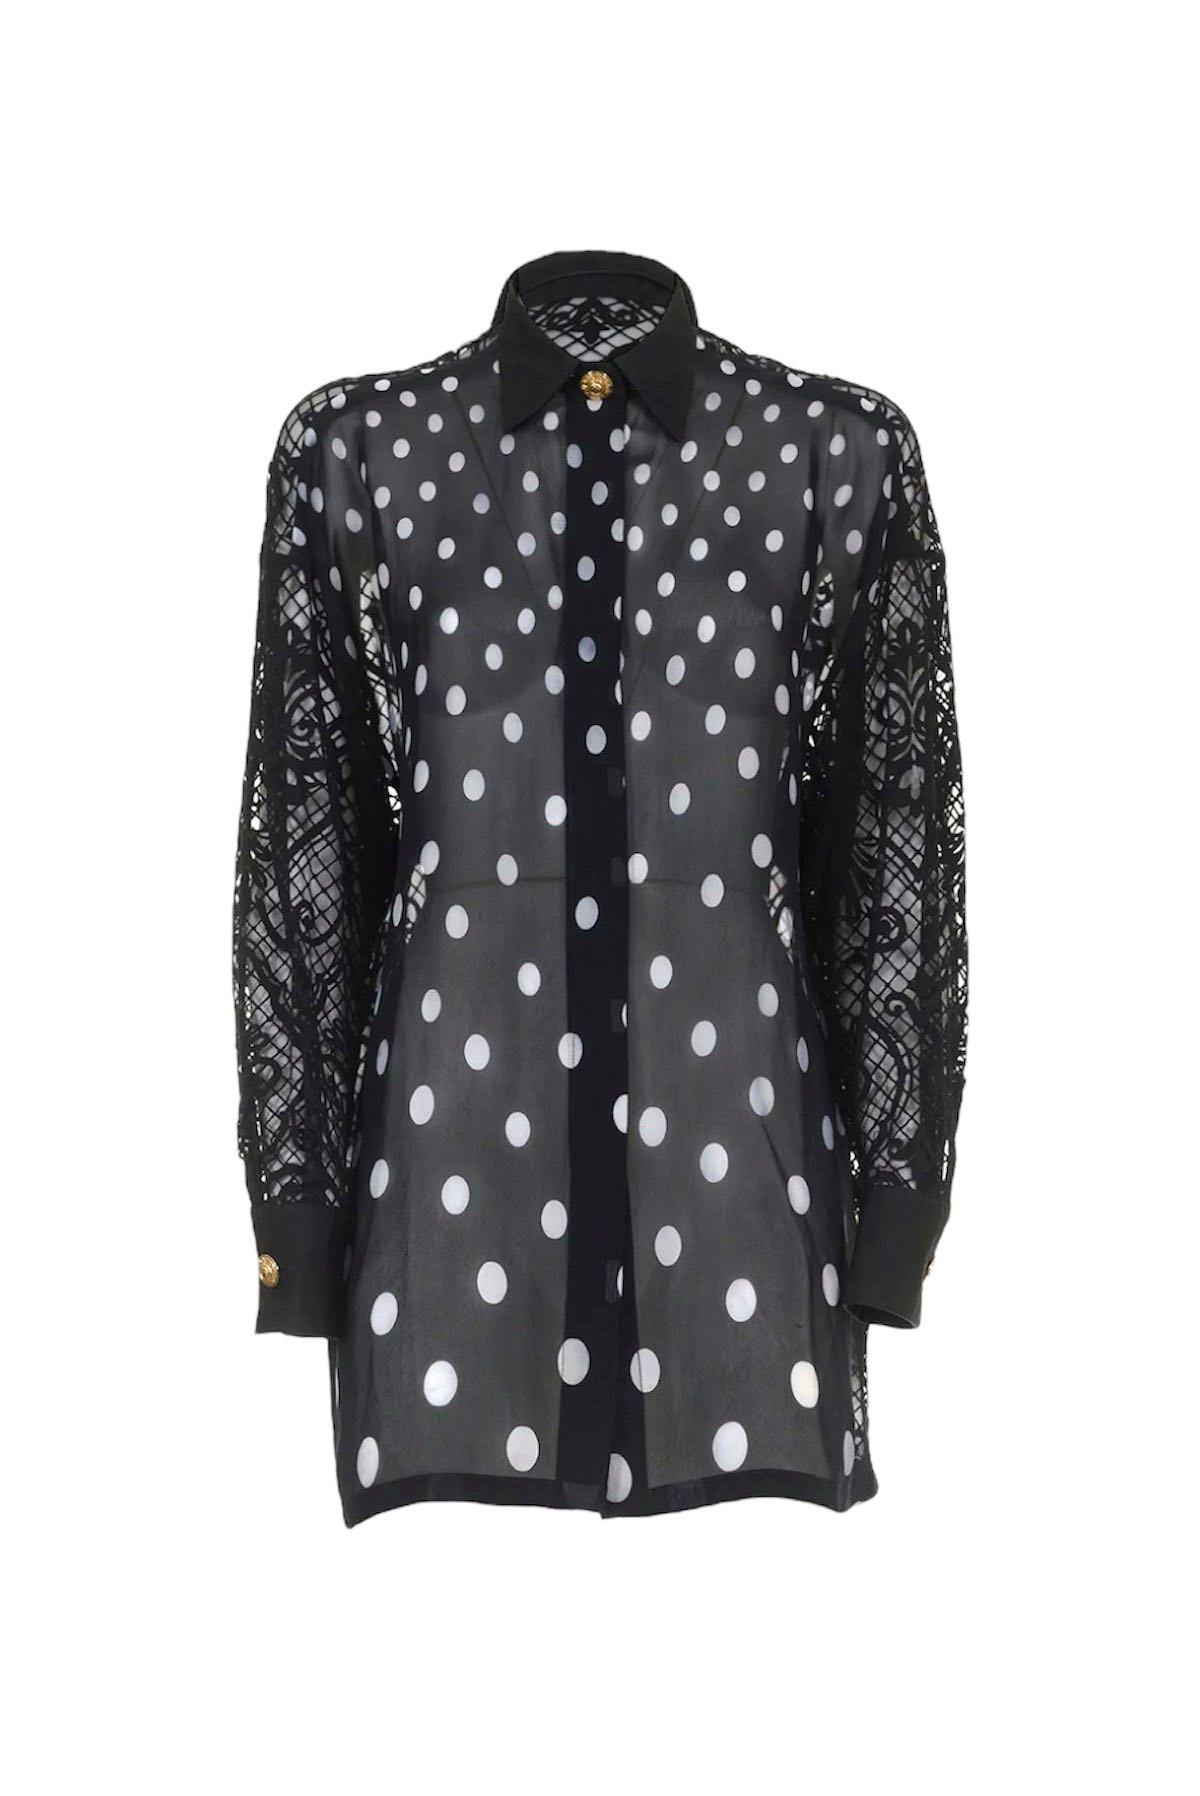 Vintage Gianni Versace Couture Sheer Polka Dot Button-Down Tunic with Burnout Lace Back and Sleeves - 1